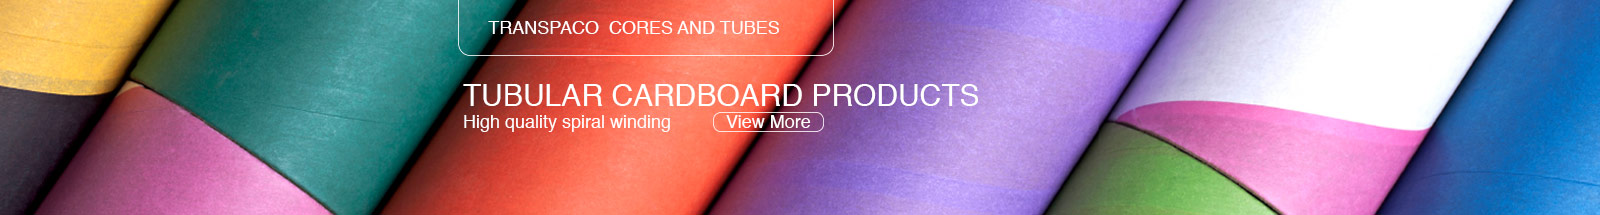 TRANSPACO CORES AND TUBE - Tubular cardboard products